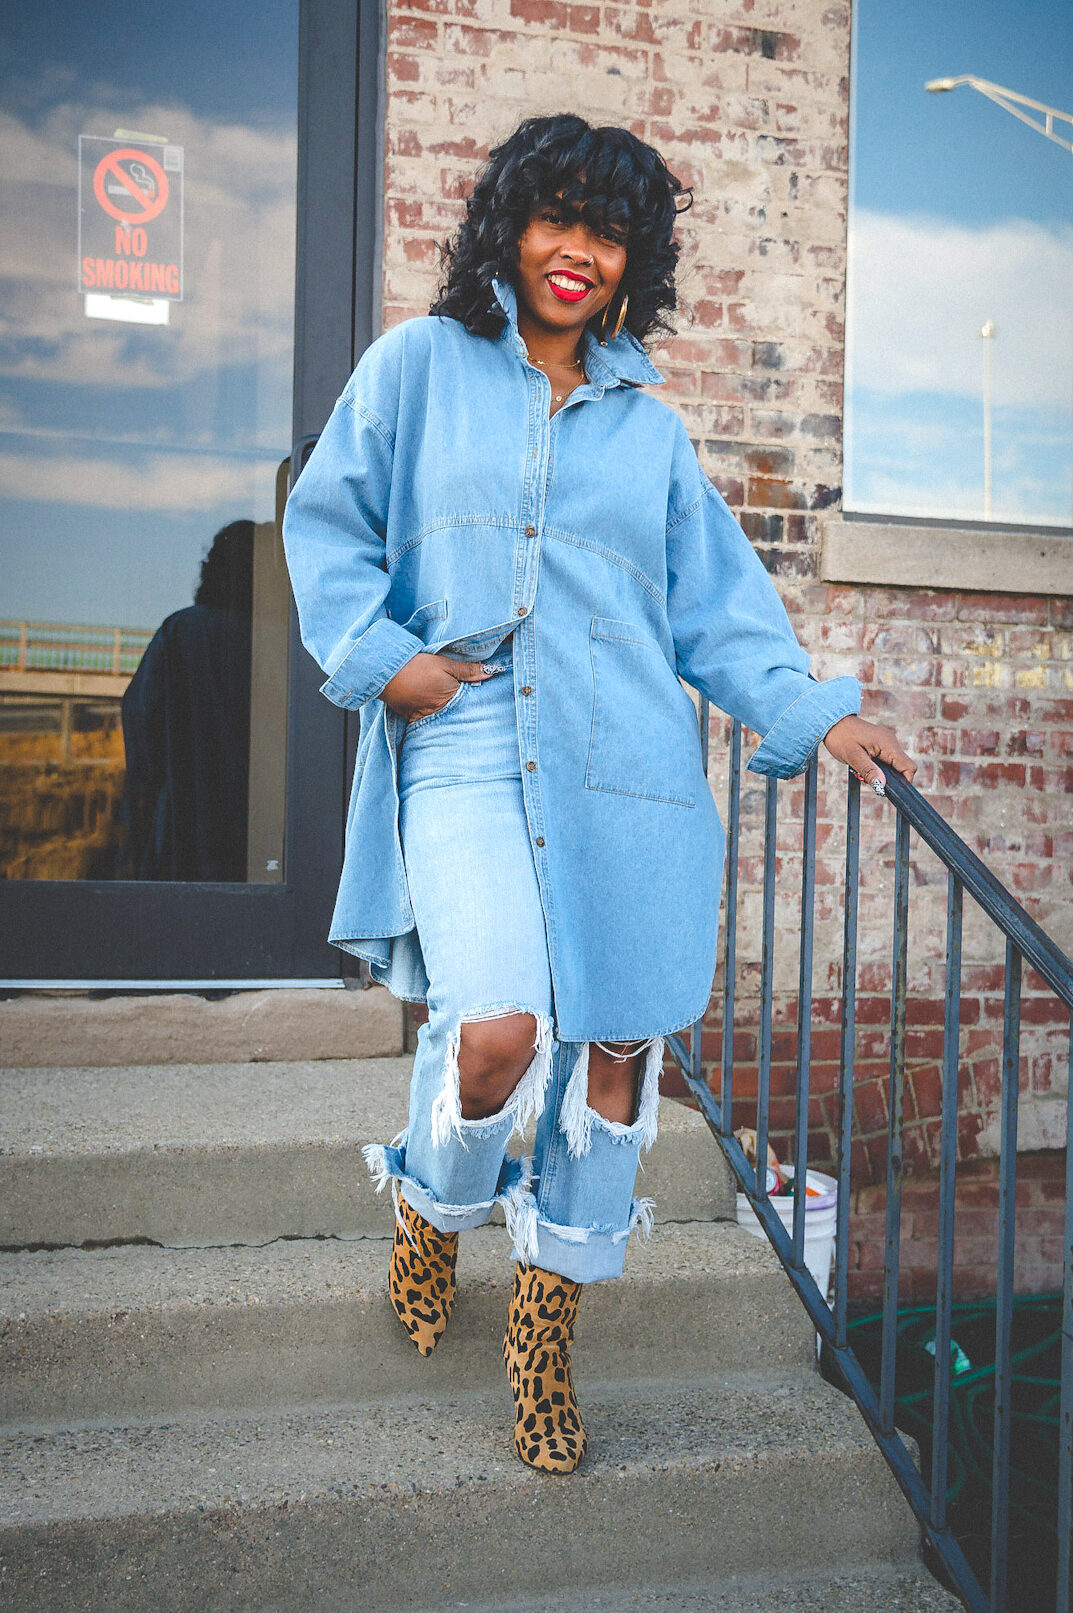 sweenee style, indianapolis fashion blog, denim on denim, leopard booties, natural hair, indianapolis fashion blog, adrienne from sweenee style, how to wear red lipstick, free people jeans, maggie jeans free people, denim shirt dress, sweeneestyleblogger, 